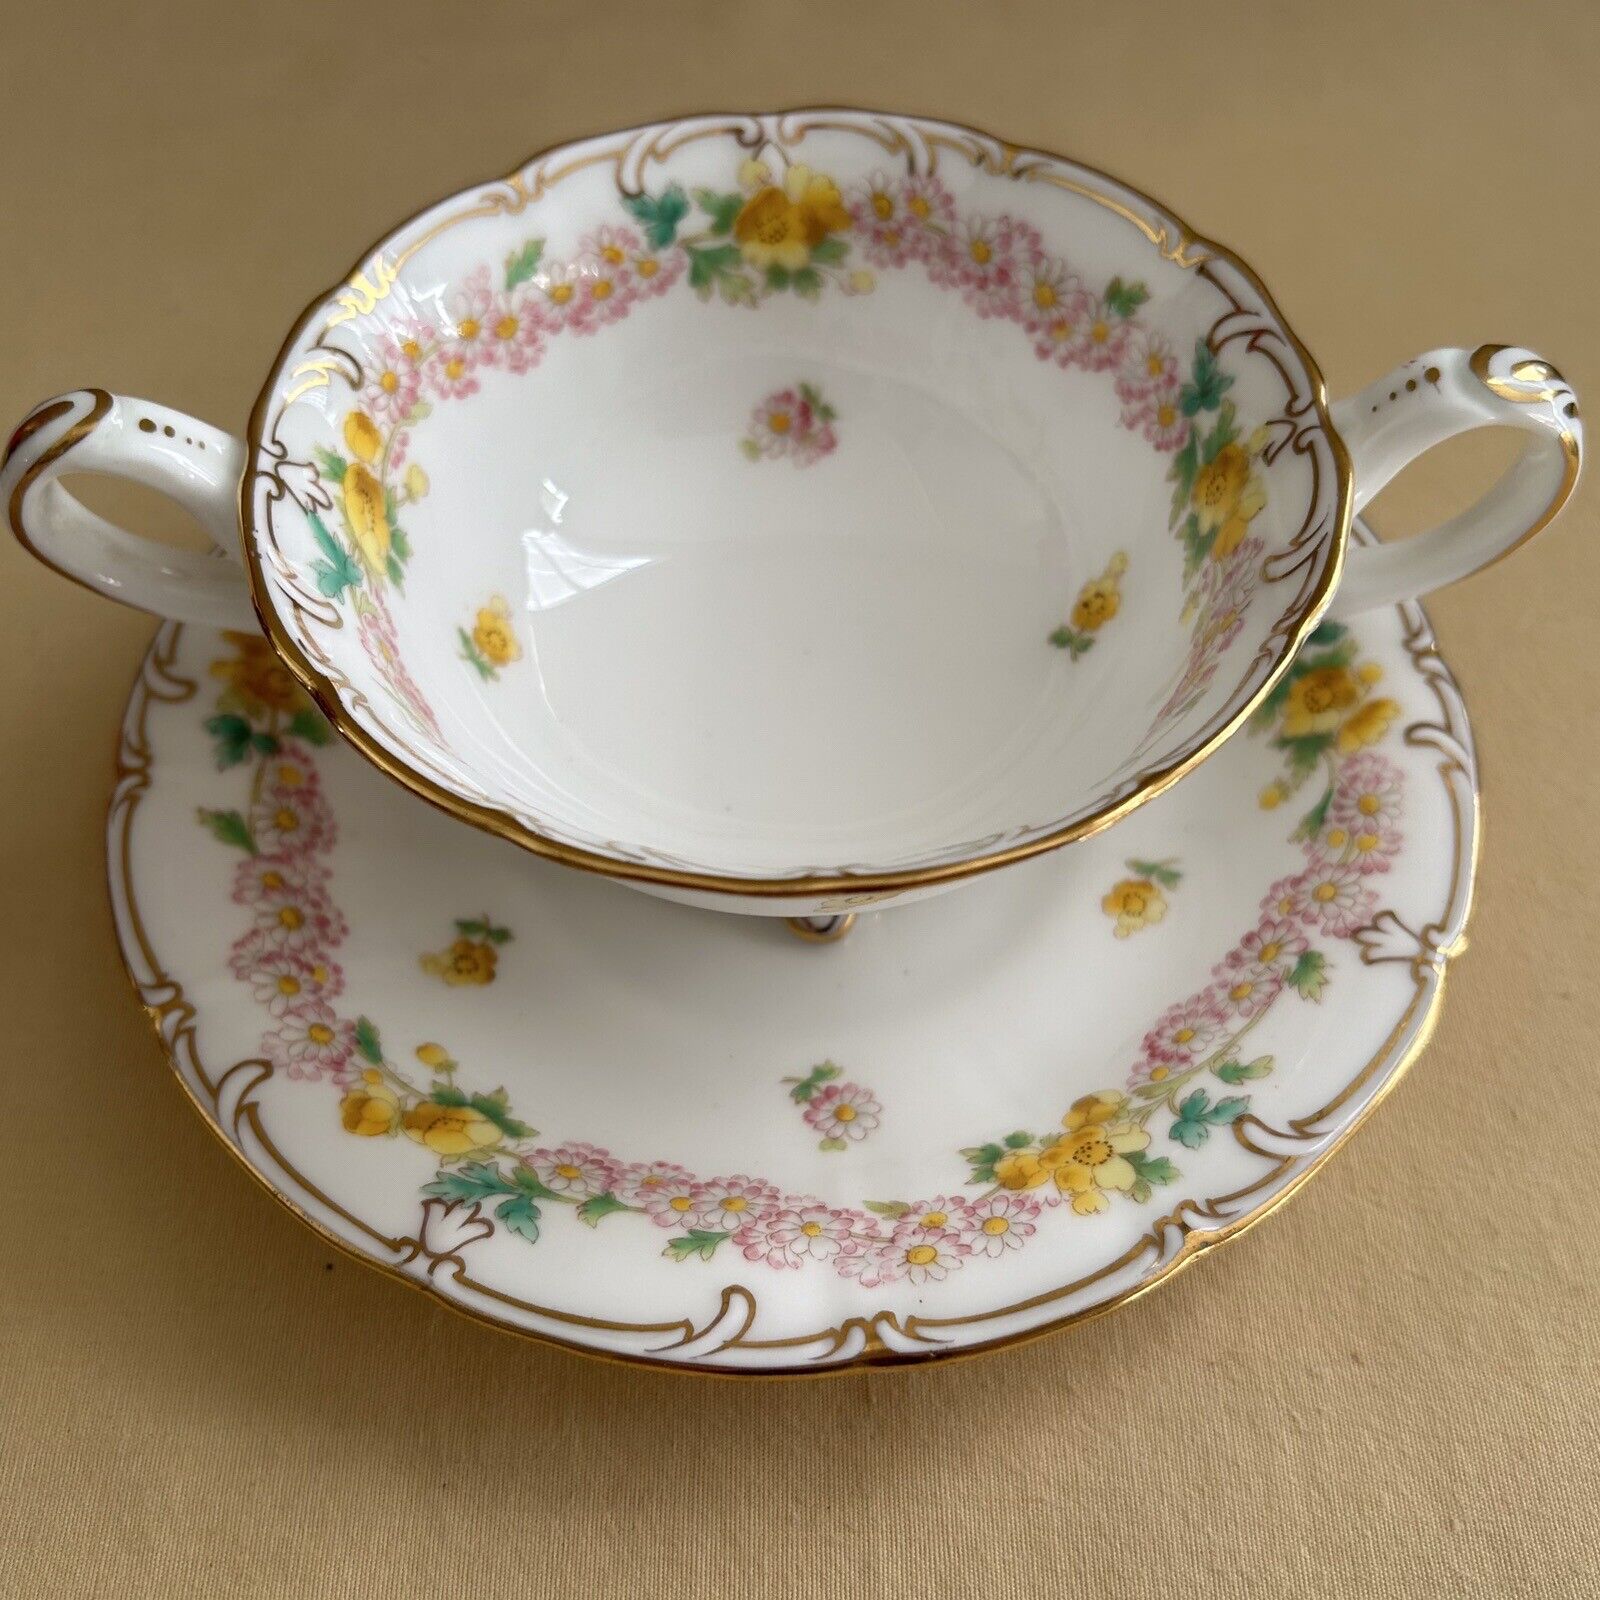 Antique Cauldon Teacup And Saucer Double Handle Pink Yellow Floral Pattern K8615